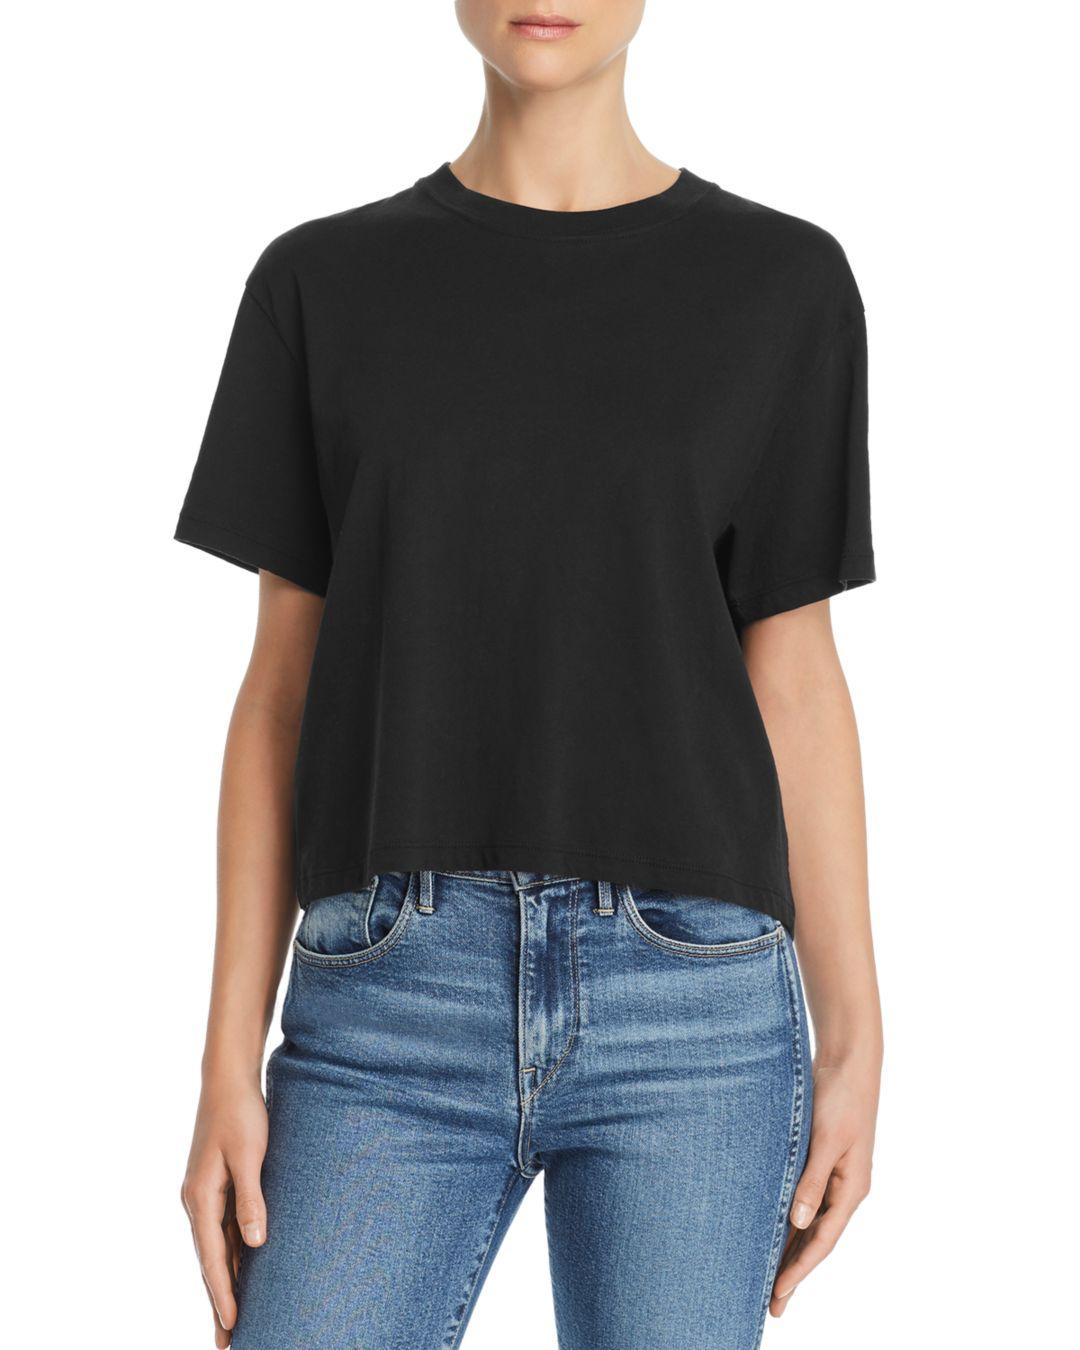 ATM Classic Jersey Tee in Black - Lyst